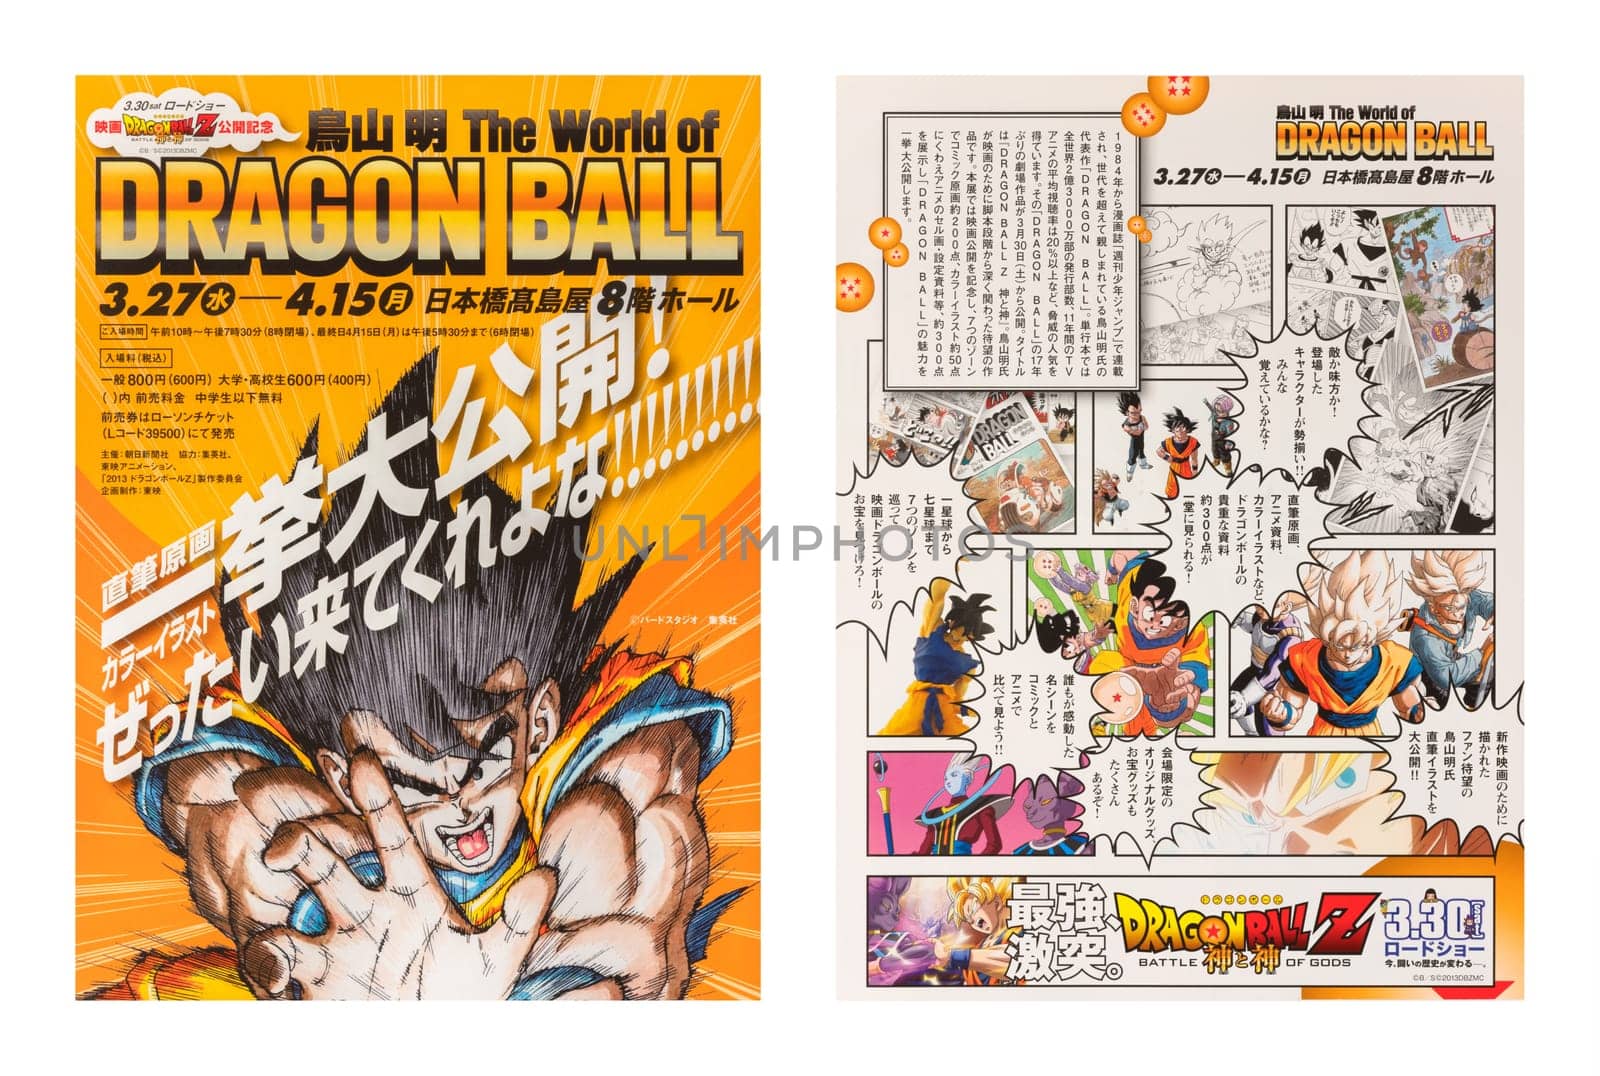 Flyer of the exhibition "Akira Toriyama The World of DRAGONBALL" held in 2013. by kuremo